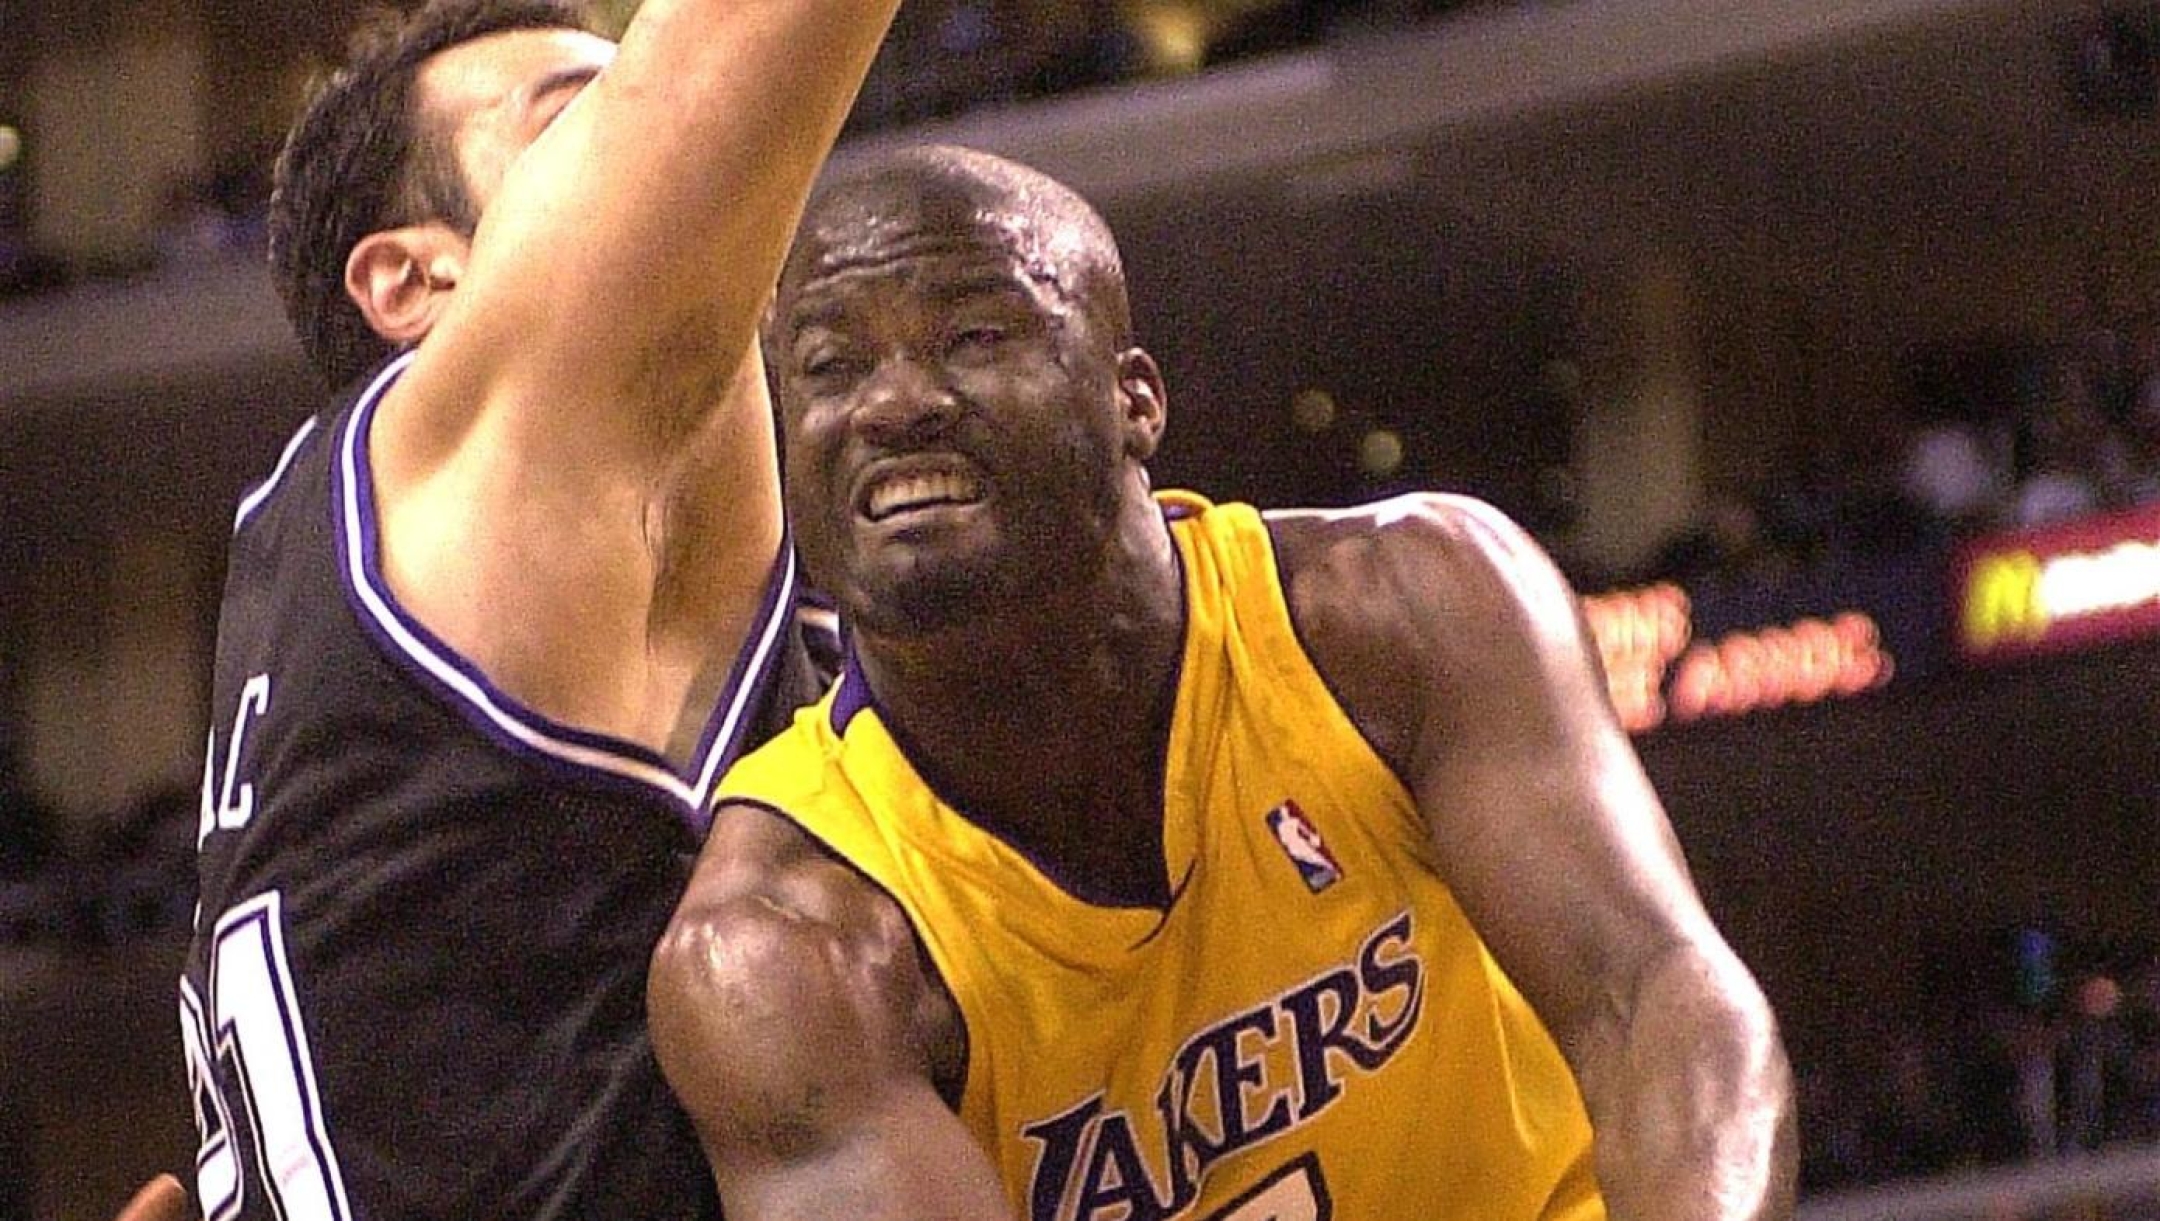 Isaiah Rider(R) of the Los Angeles Lakers tries to pass the ball past Vlade Divac(L) of the Sacramento Kings 28 March 2001 in Los Angeles, CA. The Kings defeated the Lakers, 108-84. AFP PHOTO/VINCE BUCCI (Photo by VINCE BUCCI / AFP)